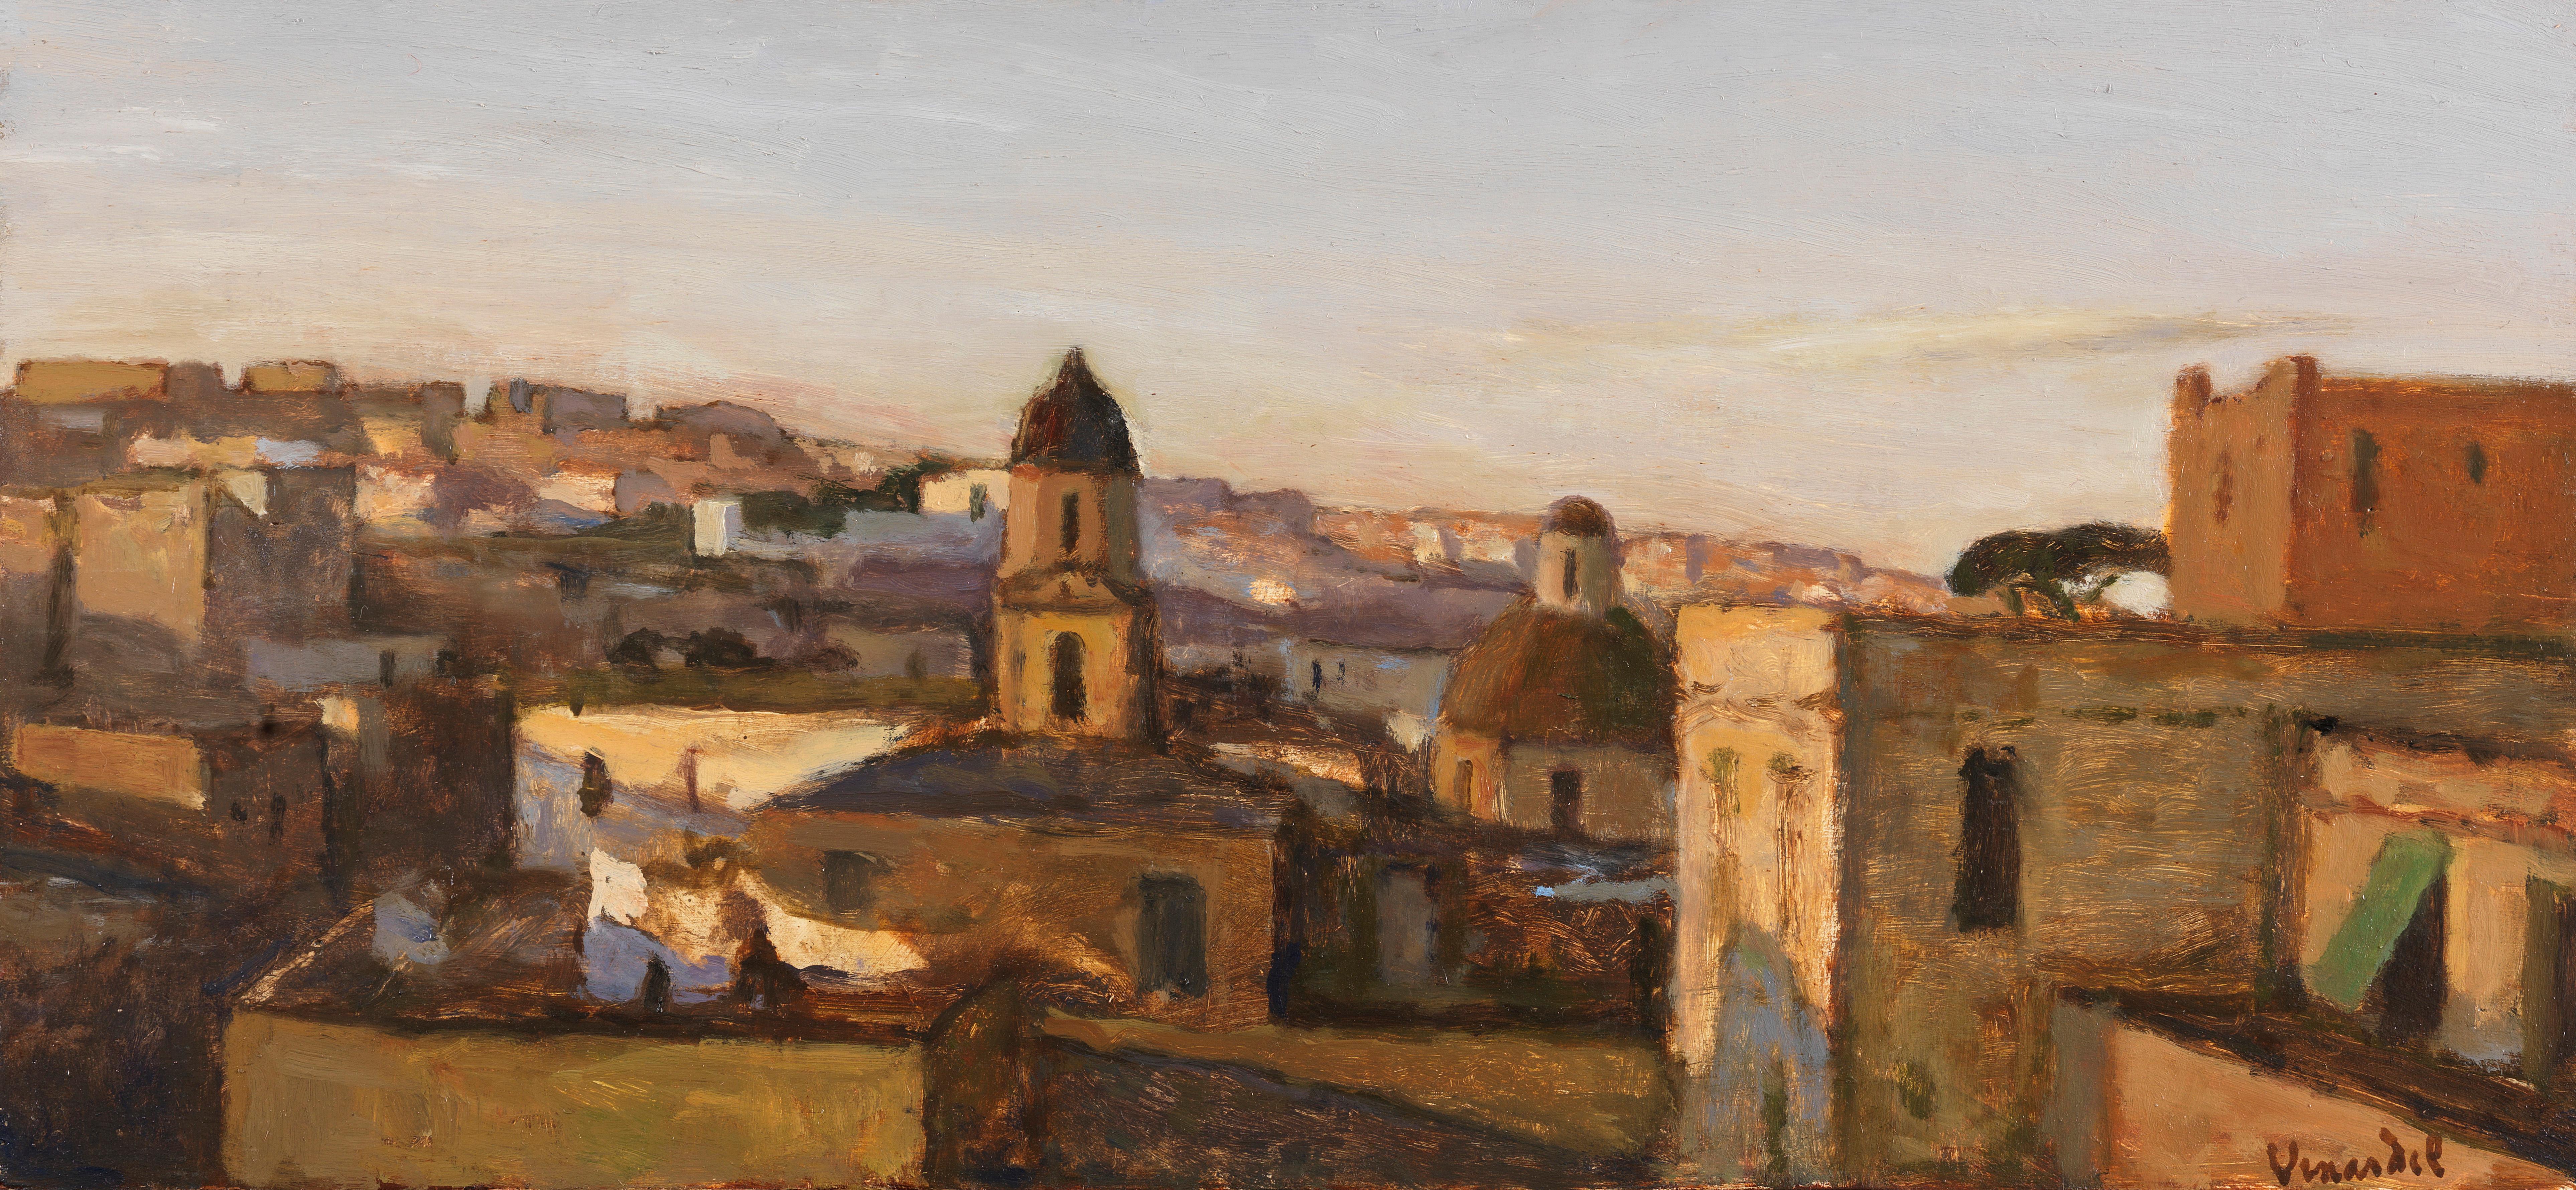 Pascal Vinardel Landscape Painting - Southern city at dawn